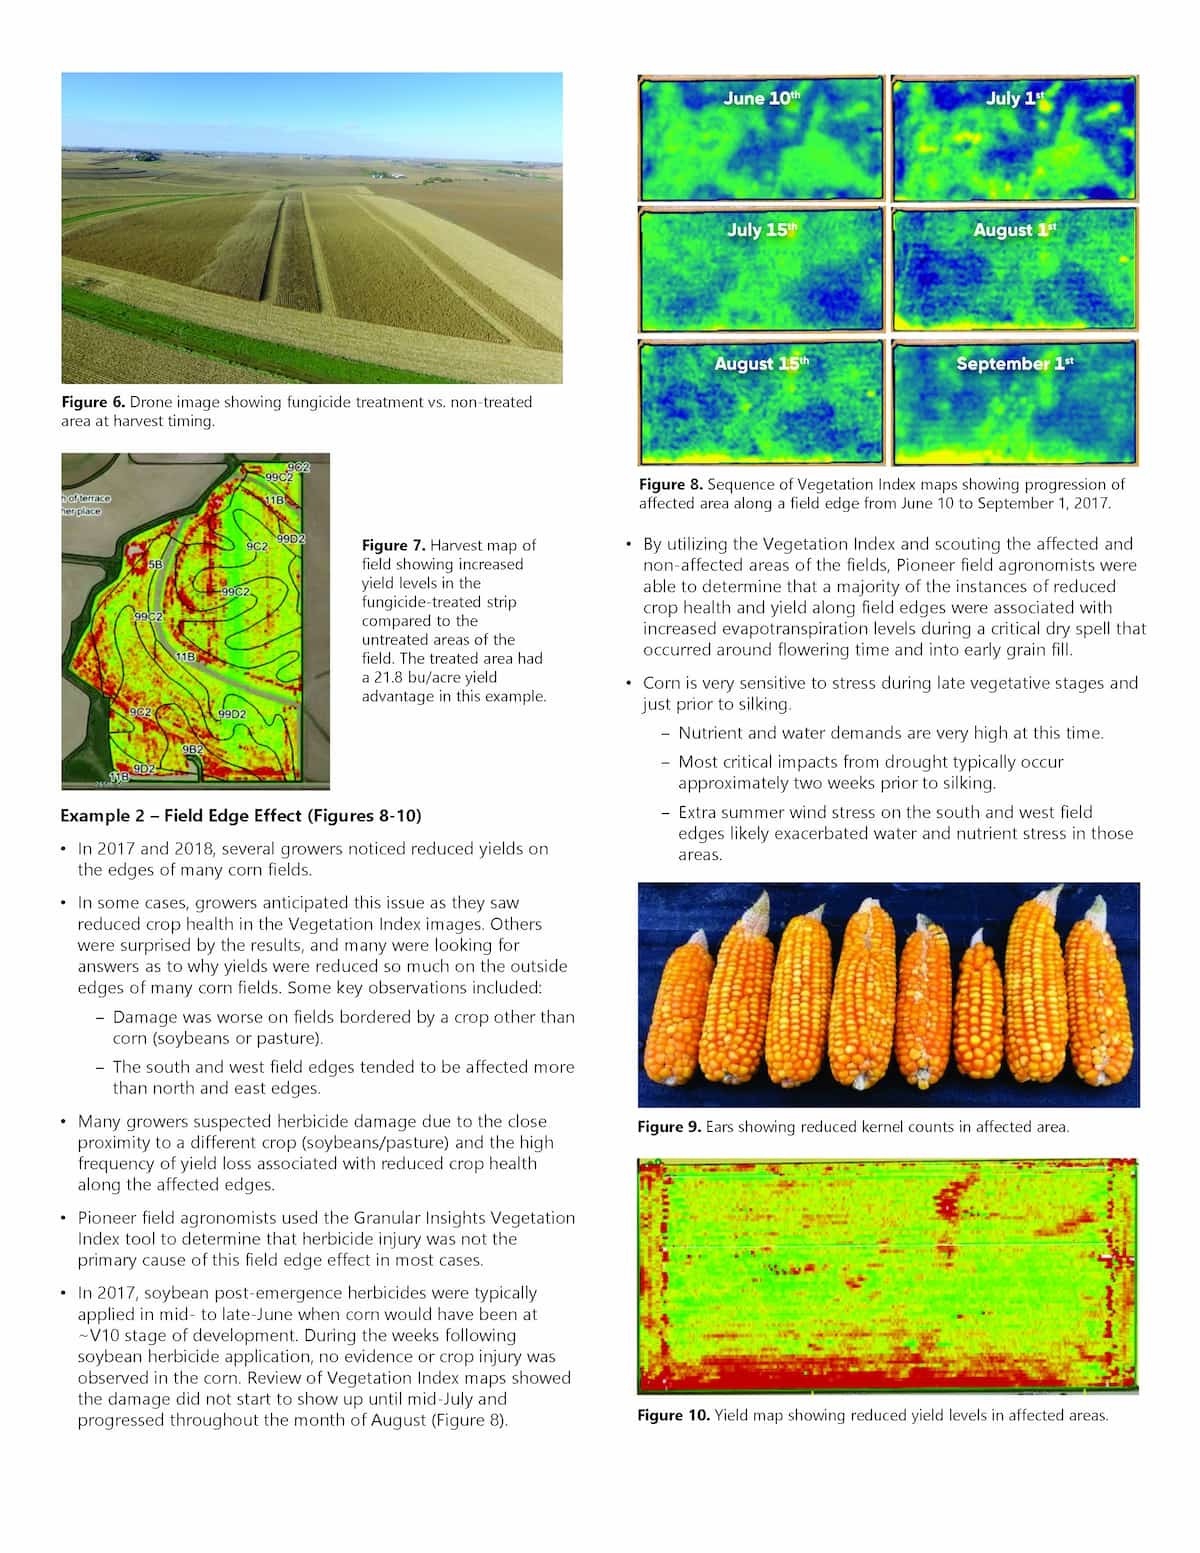 Ground Truthing Satellite Imagery in Crop Production Page 2 1